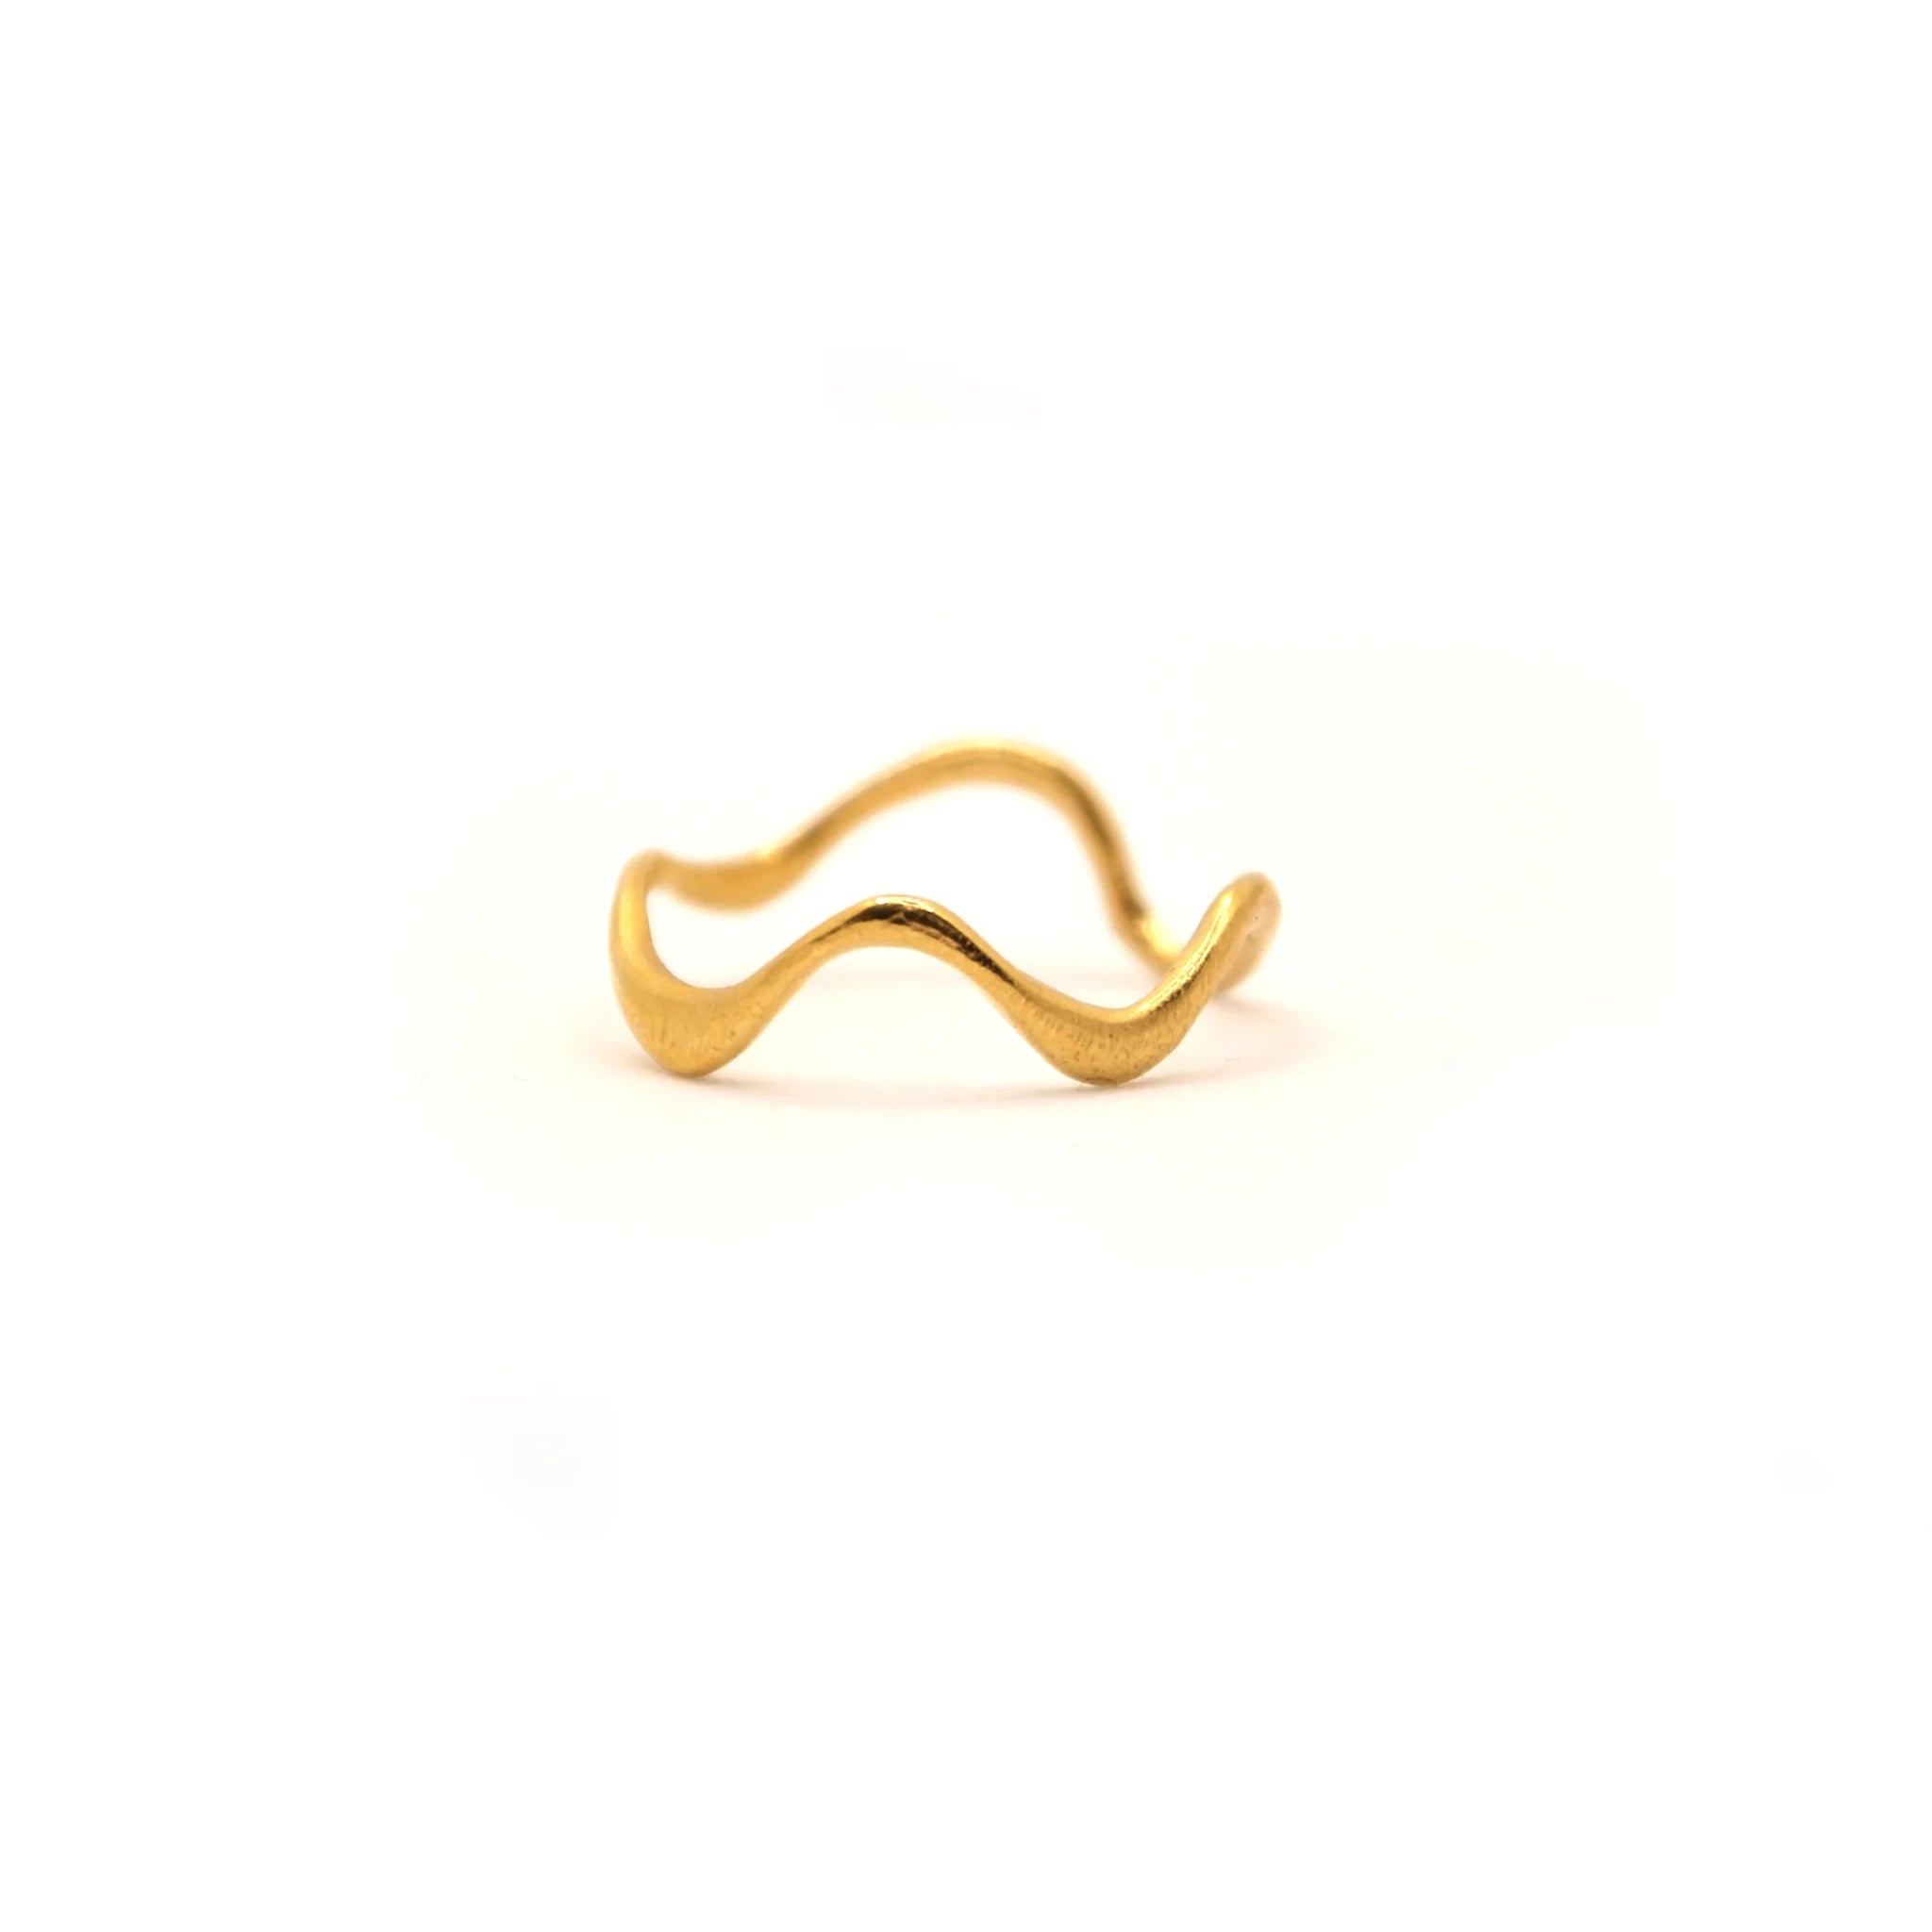 Saccostrea Ring in Silver or Gold by Hannah Bourn - Lifestory